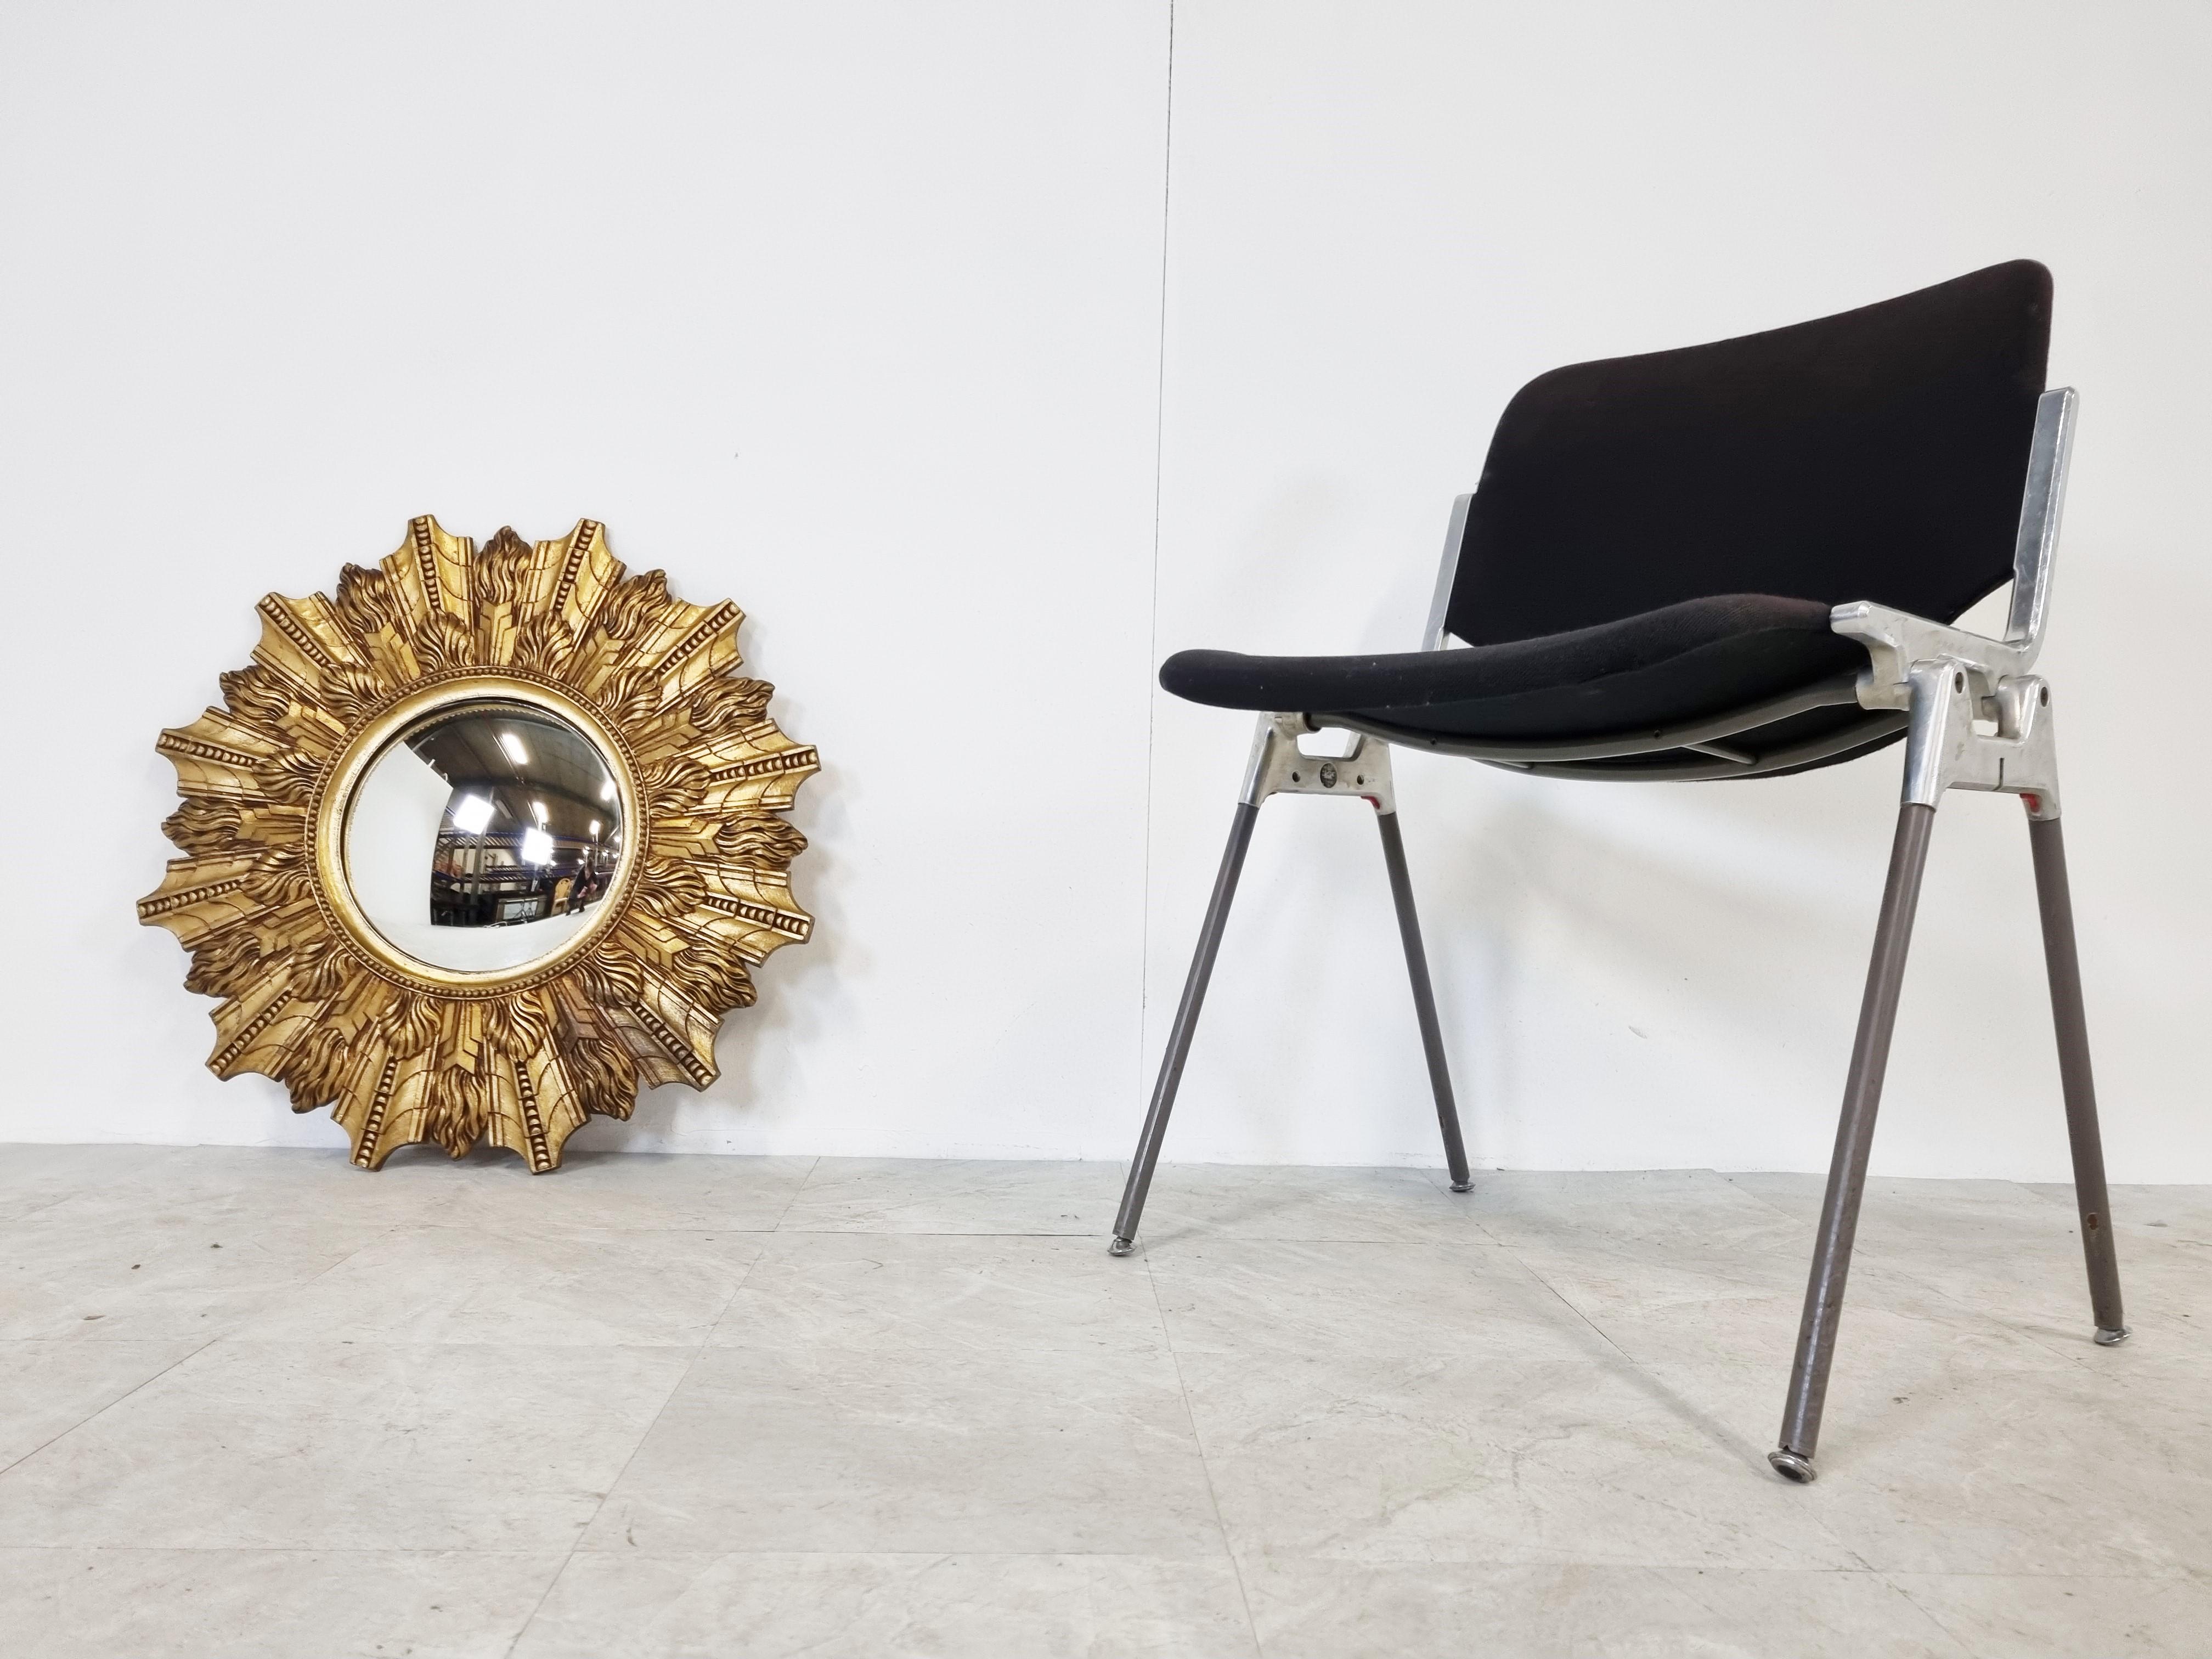 Large gilded resin sunburst mirror with convex mirror glass.

The golden mirror is in a very good condition, beautifully patinated.

1960s - made in Belgium.

Large diameter

Dimensions:
Diameter: 65 cm/ 25.59